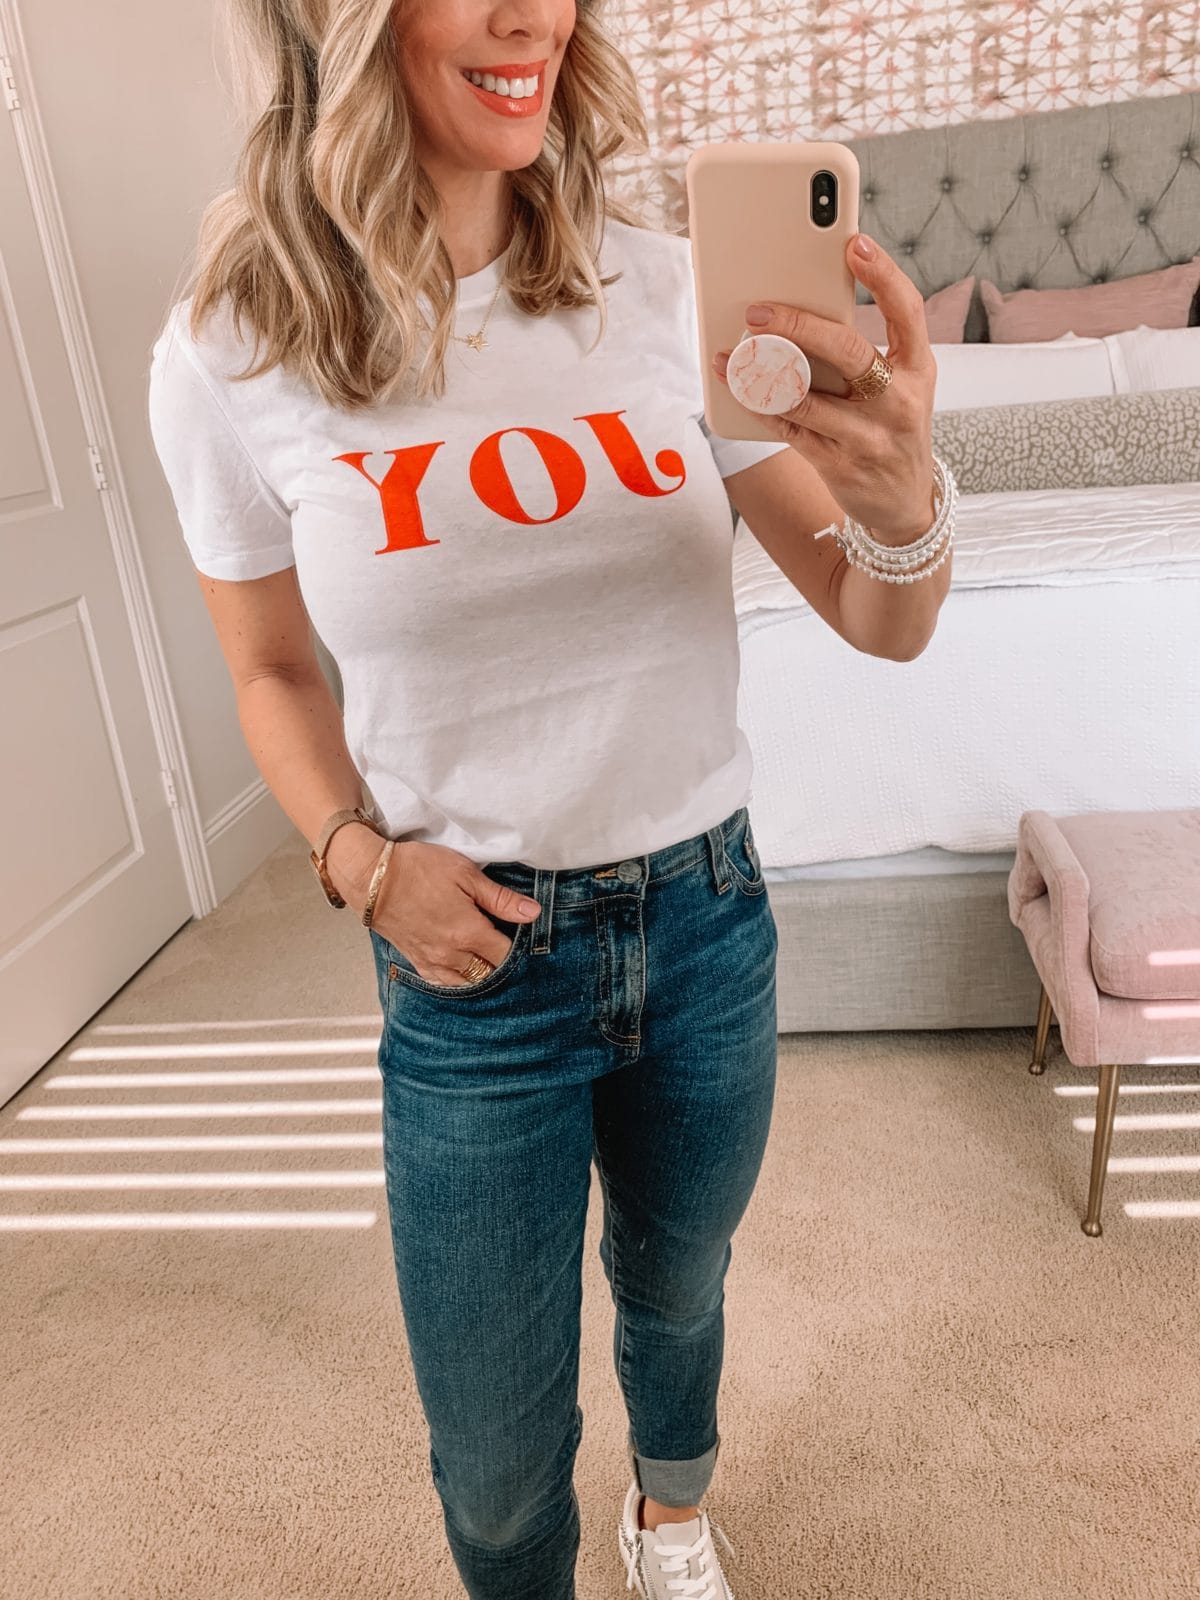 Dressing Room Finds Nordstrom, Joy Tee, AG High Waist Jeans, Studded Sneakers